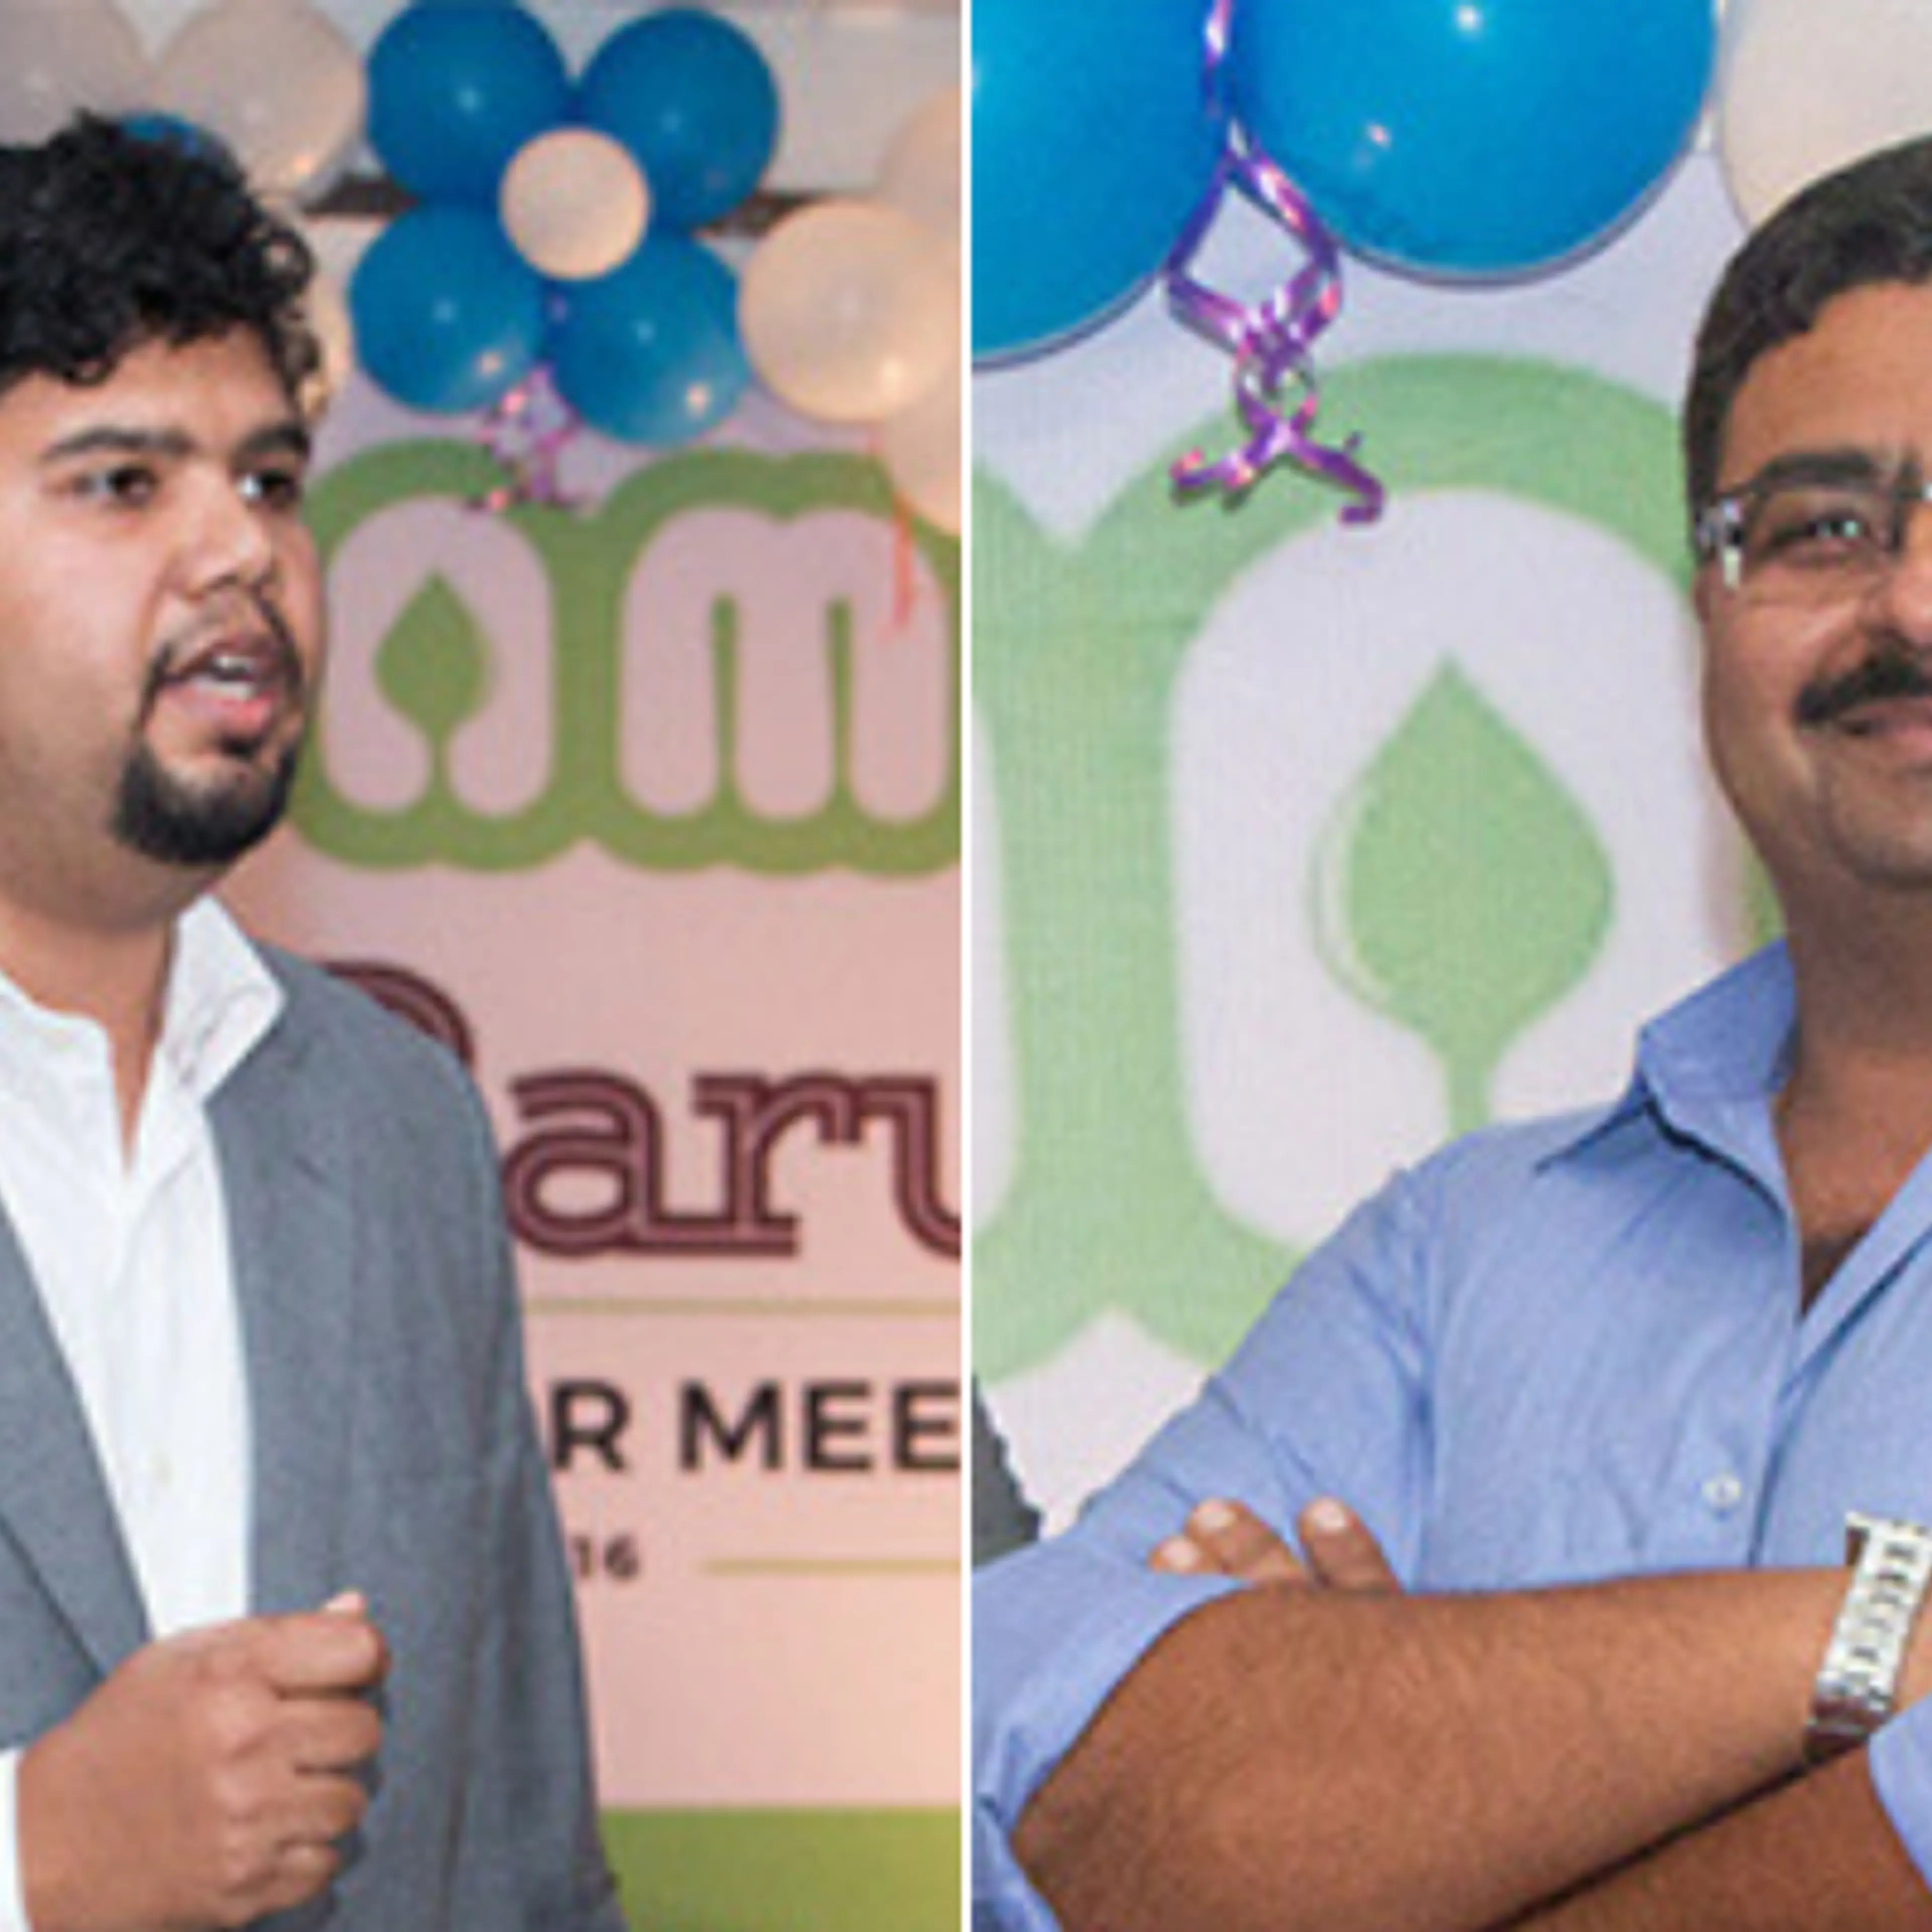 These Jharkhand-based founders who almost went bankrupt twice now clock Rs 120 Cr revenue from their dairy brand